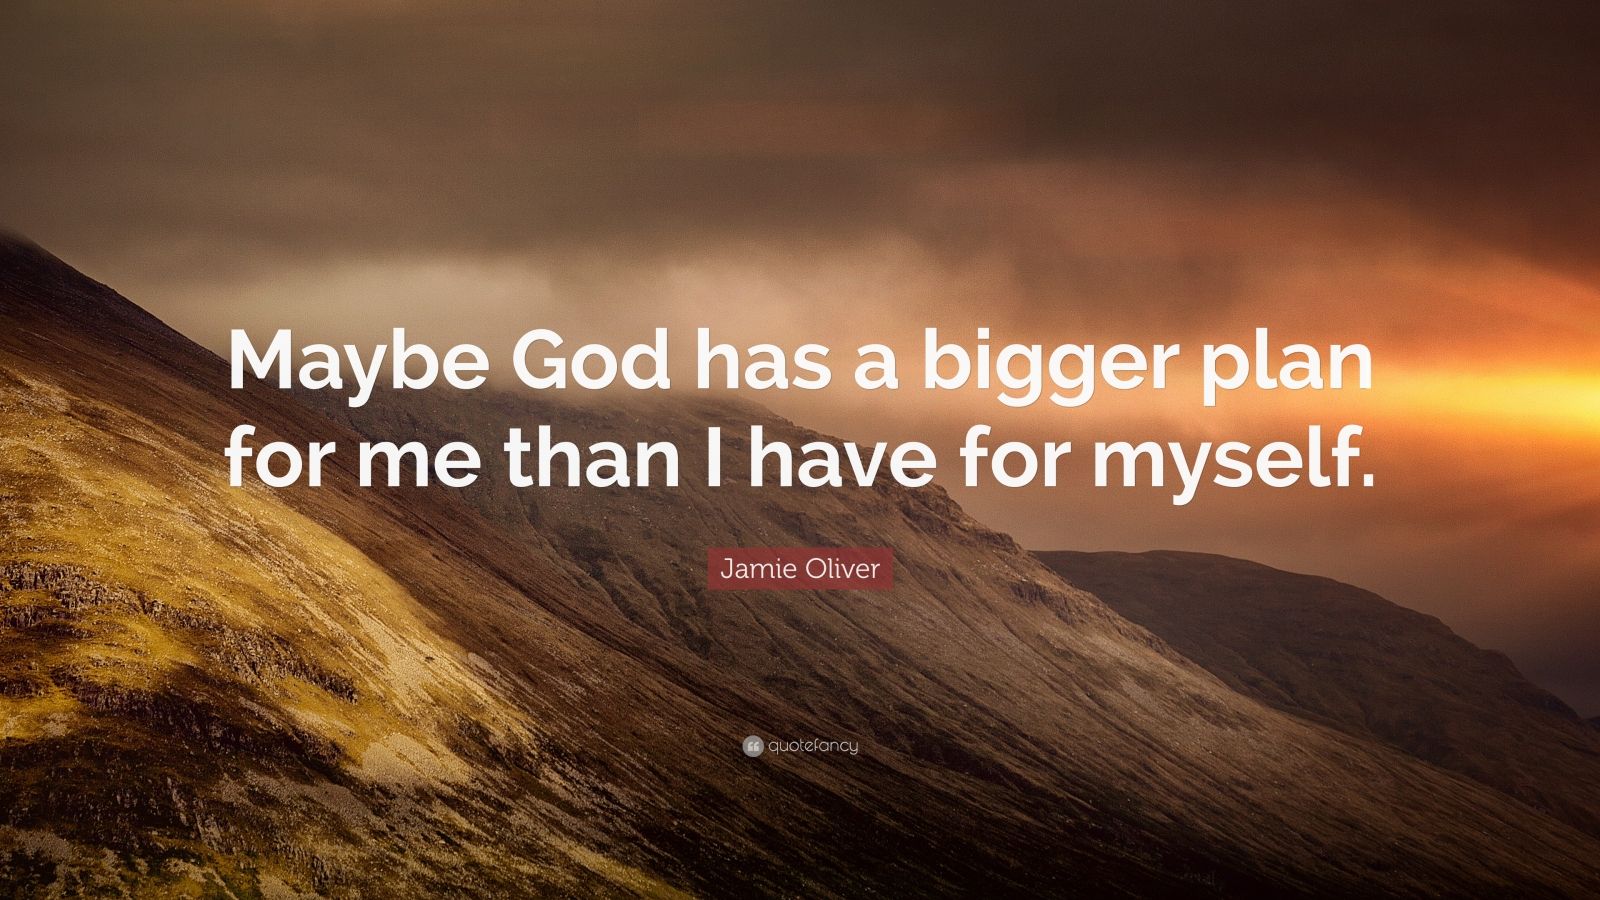 Jamie Oliver Quote: "Maybe God has a bigger plan for me than I have for ...